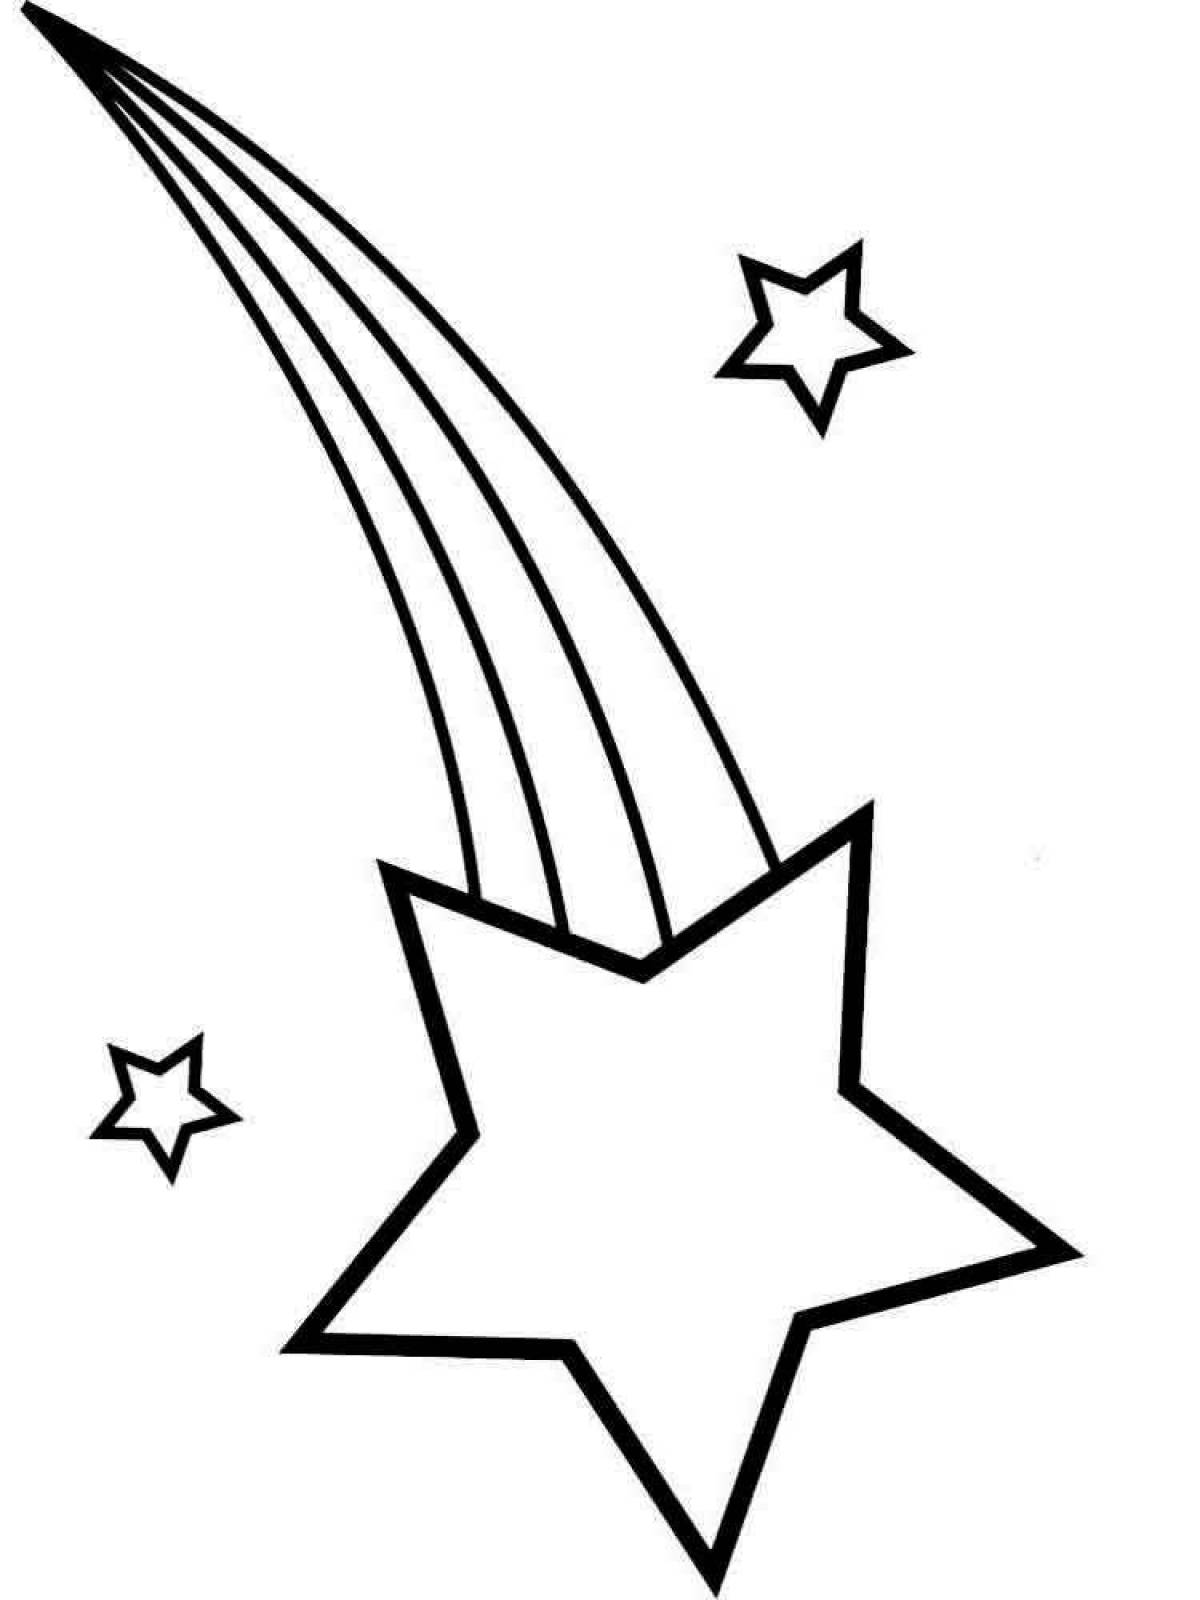 Fascinating star coloring book for kids